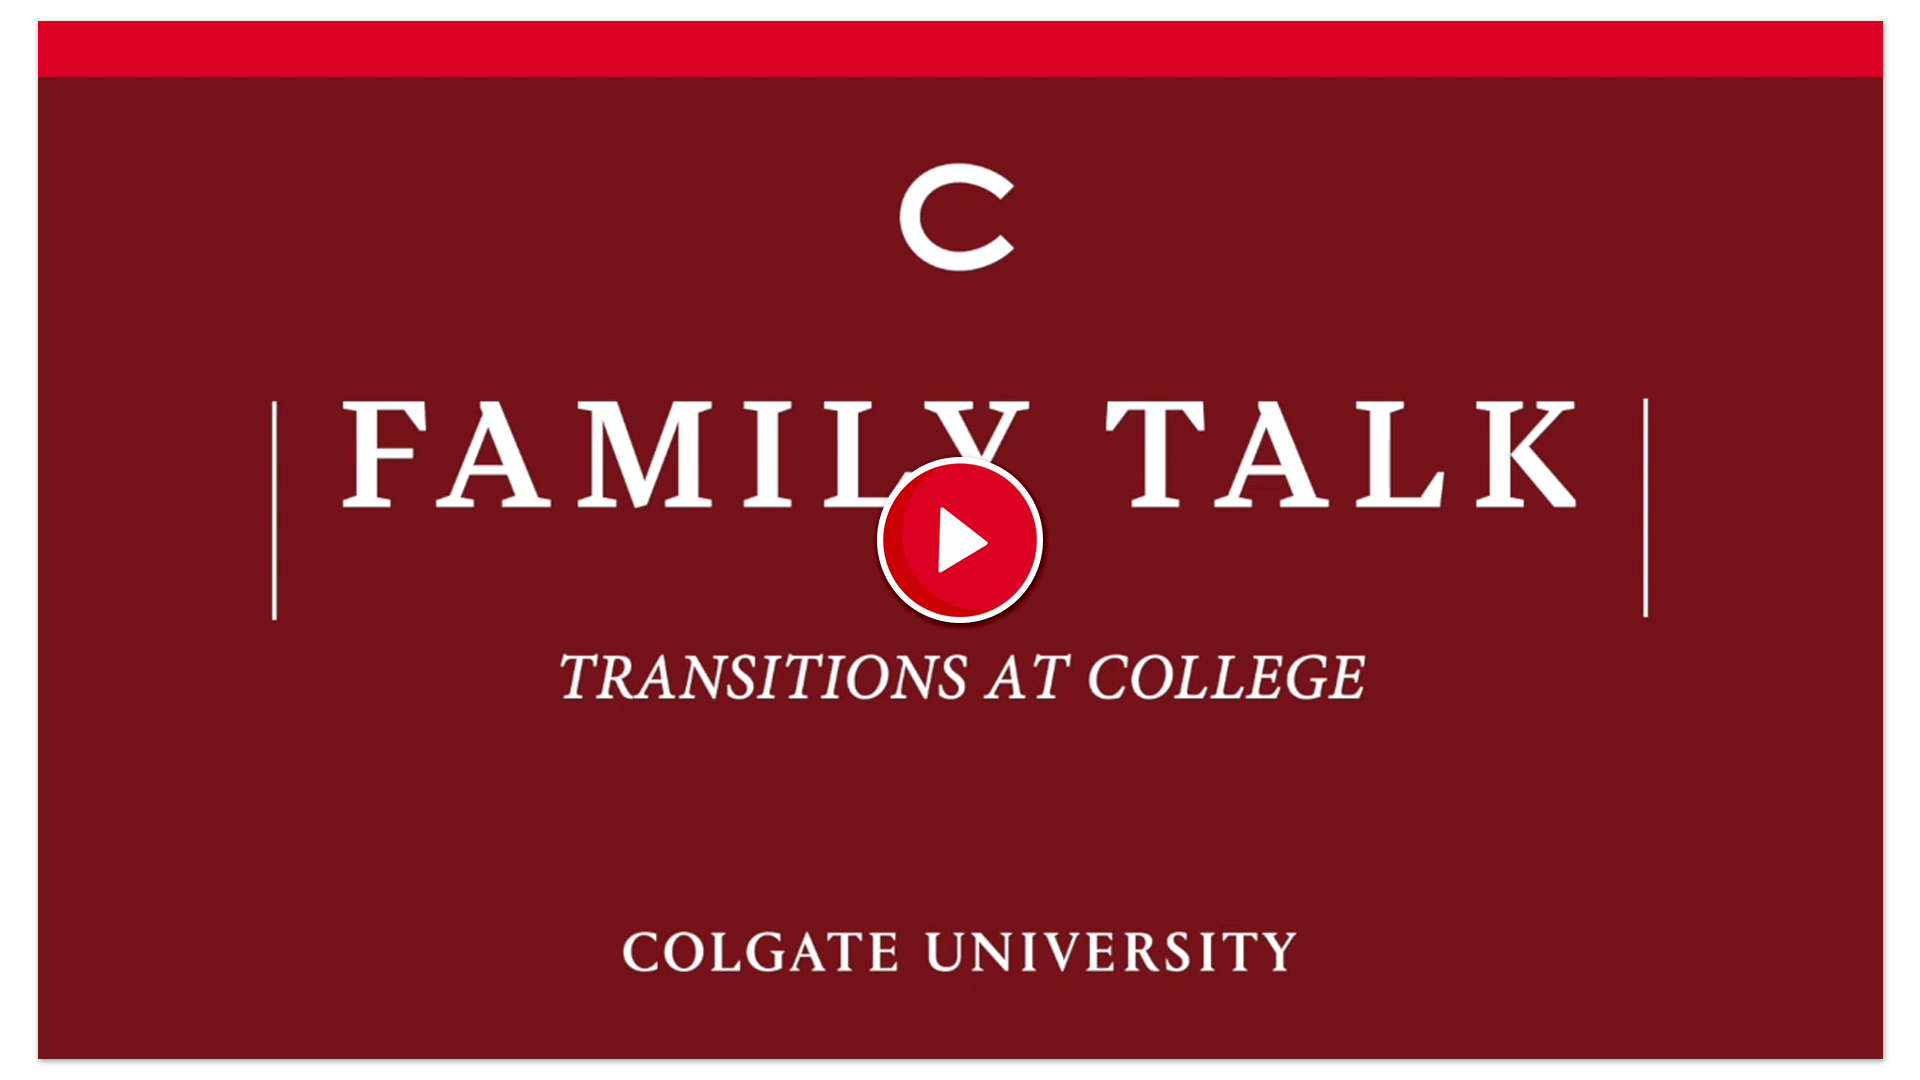 Family Talk video and play button